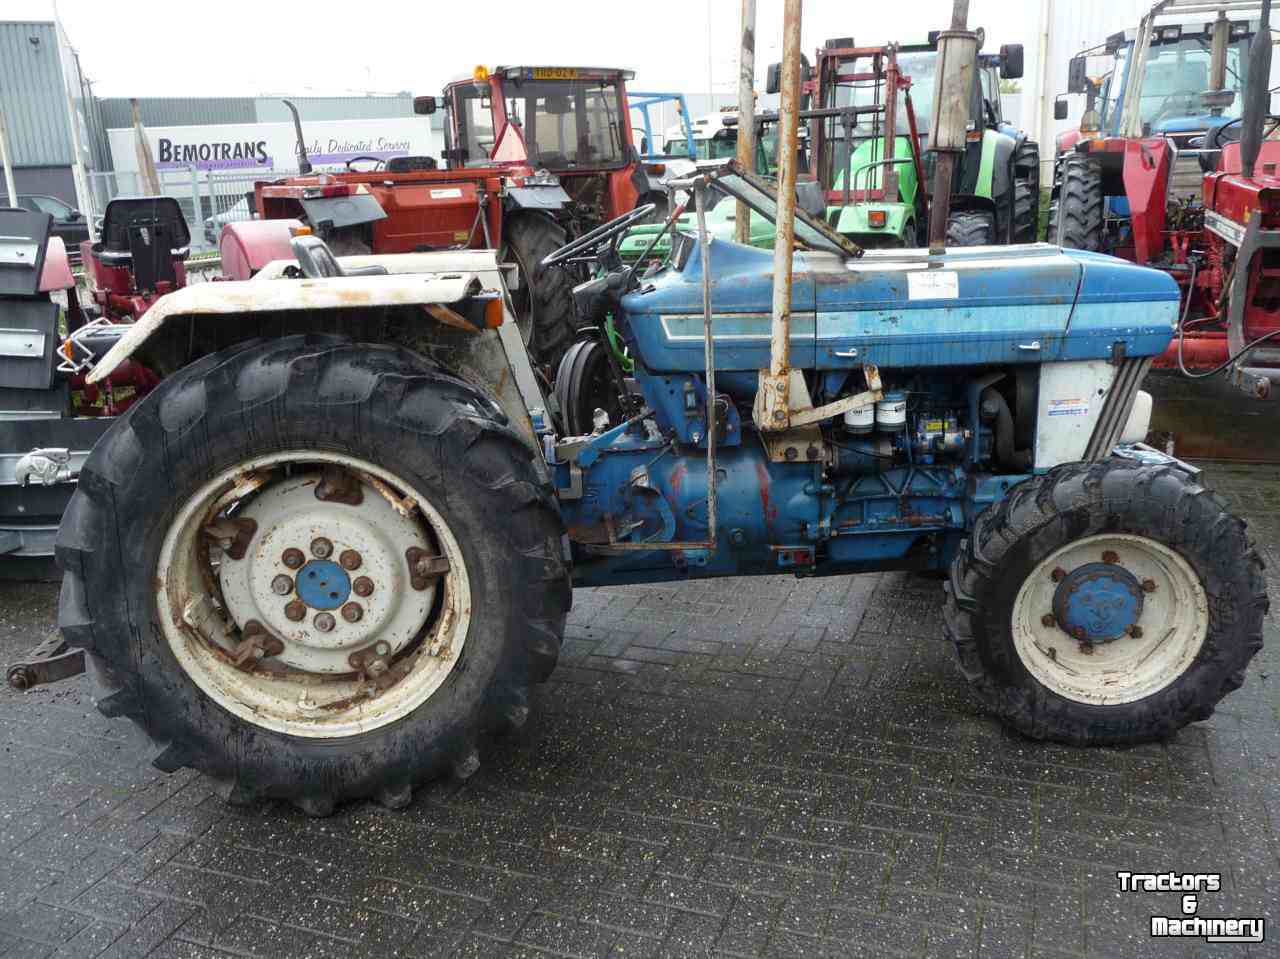 Small-track Tractors Ford 4610